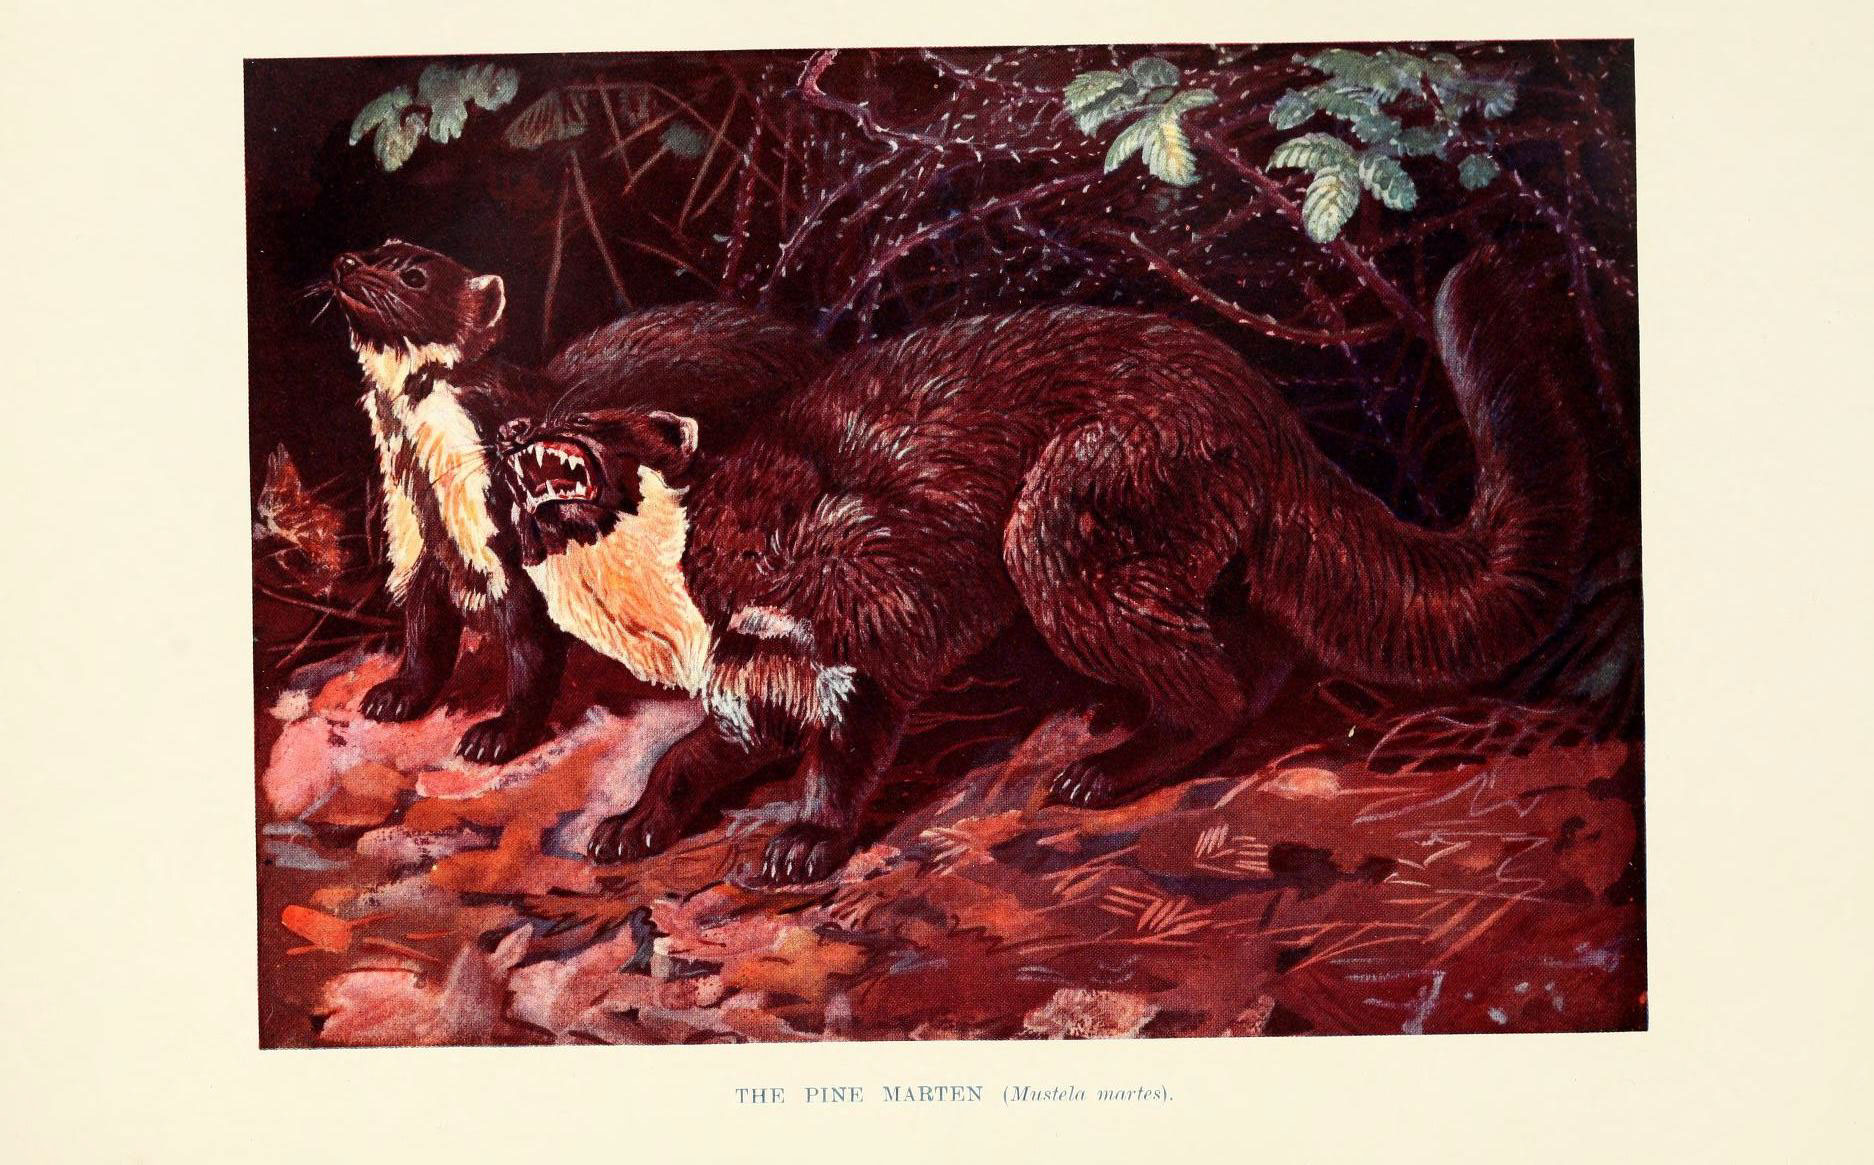 the illustration depicts two bears with long claws